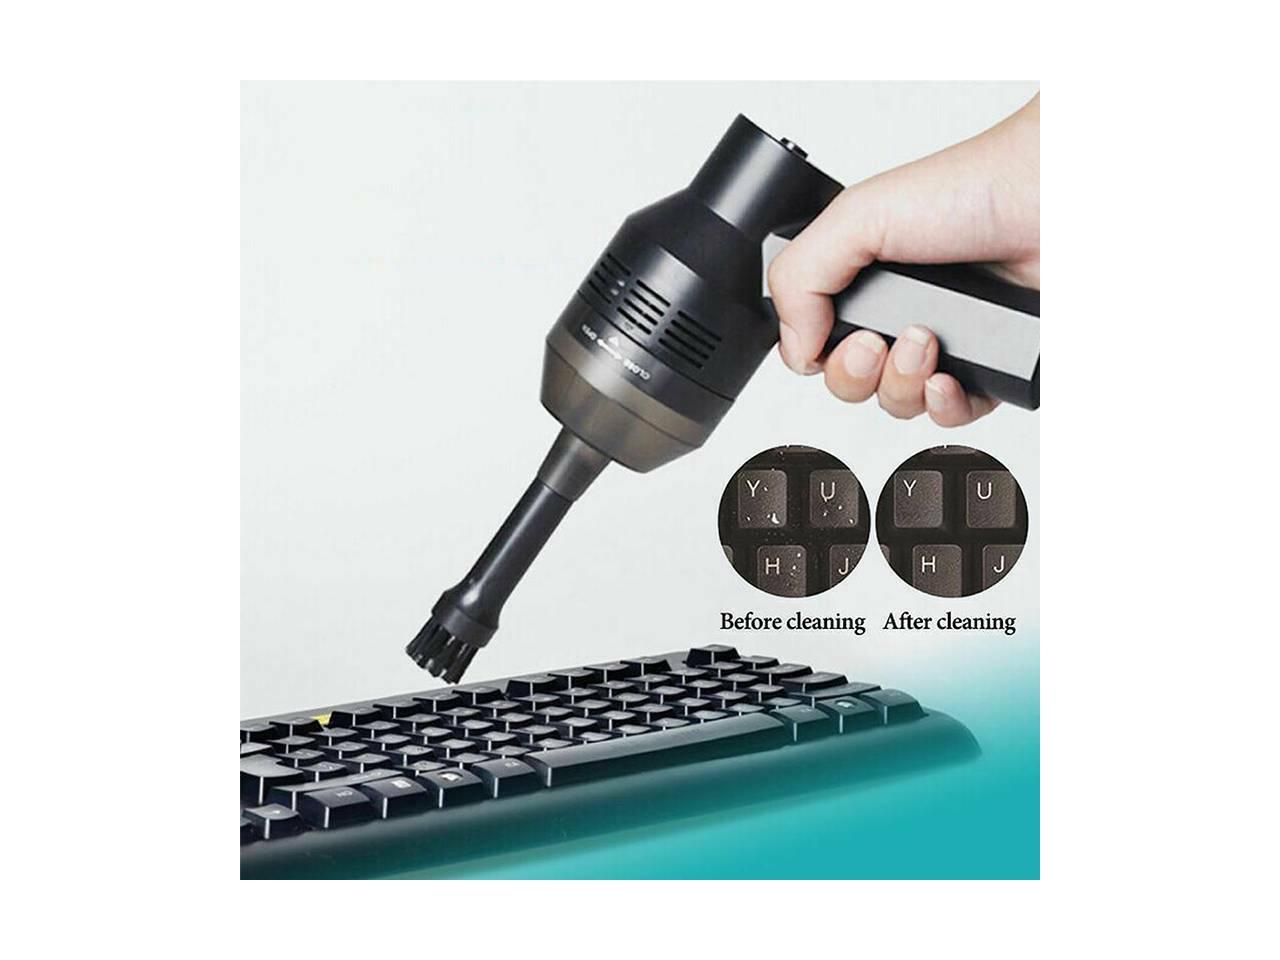 Pomya Keyboard Cleaner Black Mini USB Keyboard Vacuum Cleaner with Brush Dust Cleaning Kit for PC Laptop Notebook Computer Cleaning Kits 